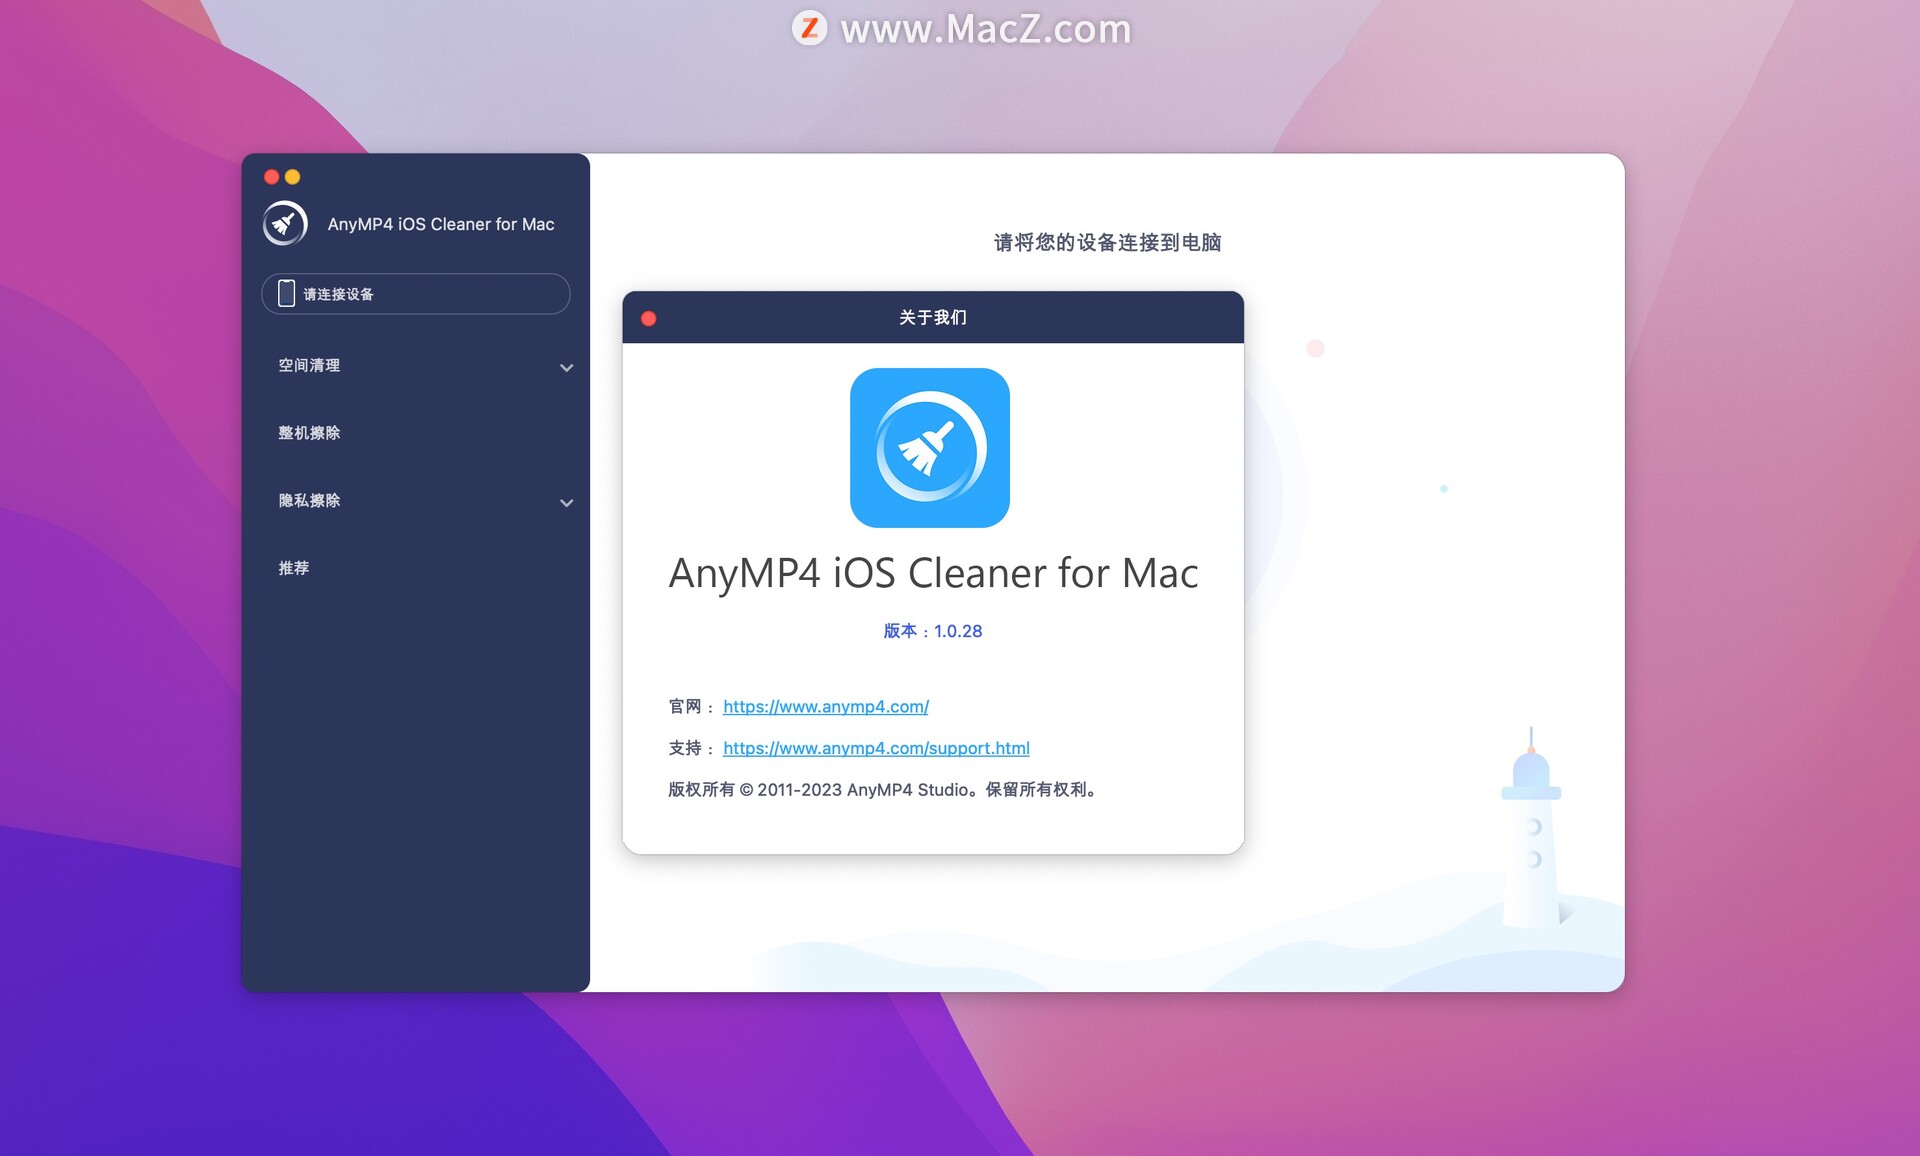 iPhone垃圾清理器：AnyMP4 iOS Cleaner for mac